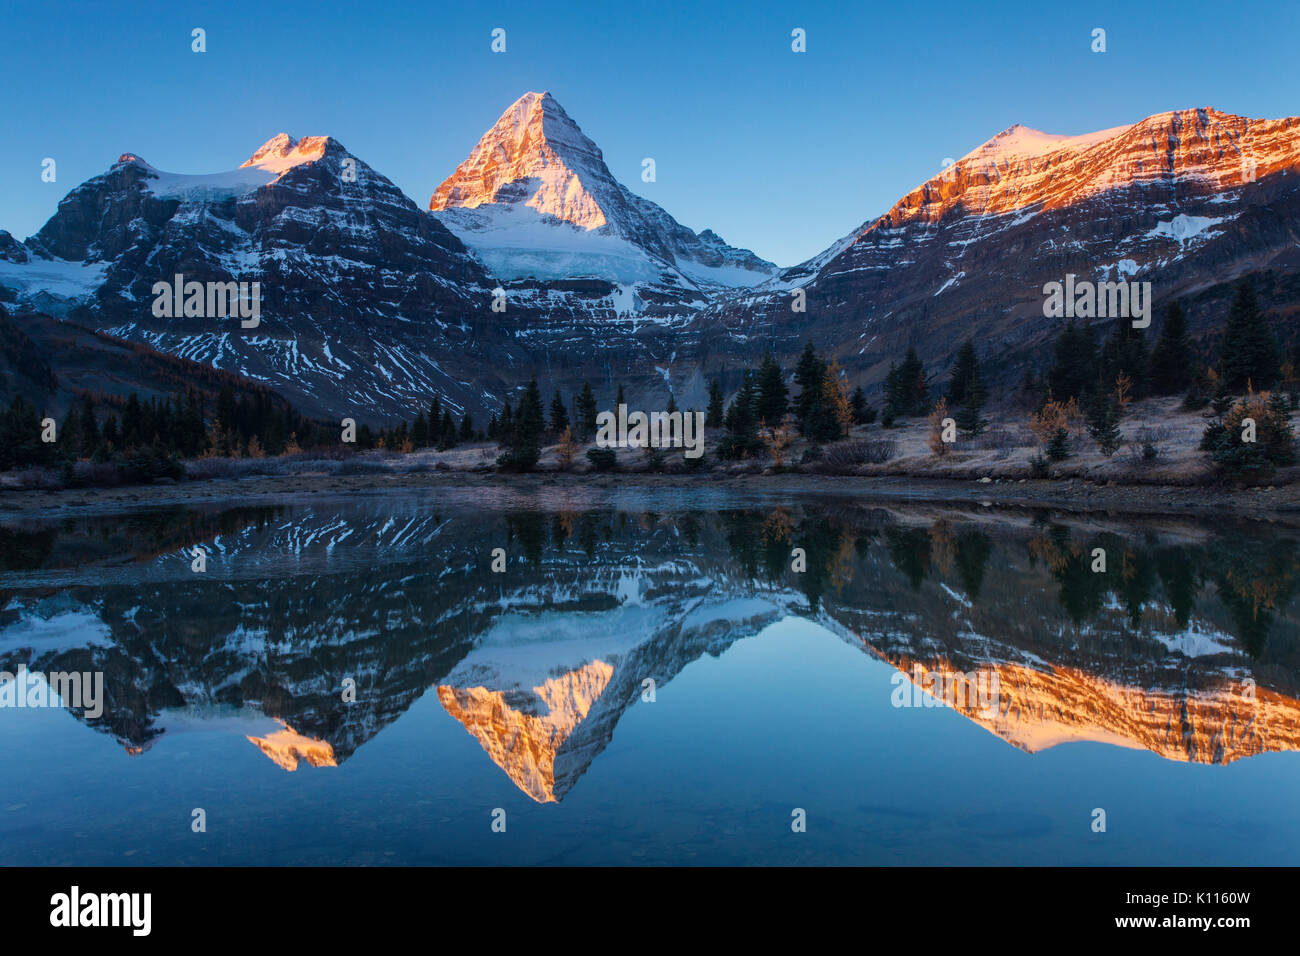 Mount Assiniboine reflected in Lage Magog in early morning, Mount Assiniboine Provincial Park, Rocky Mountains, British Columbia, Canada. Stock Photo